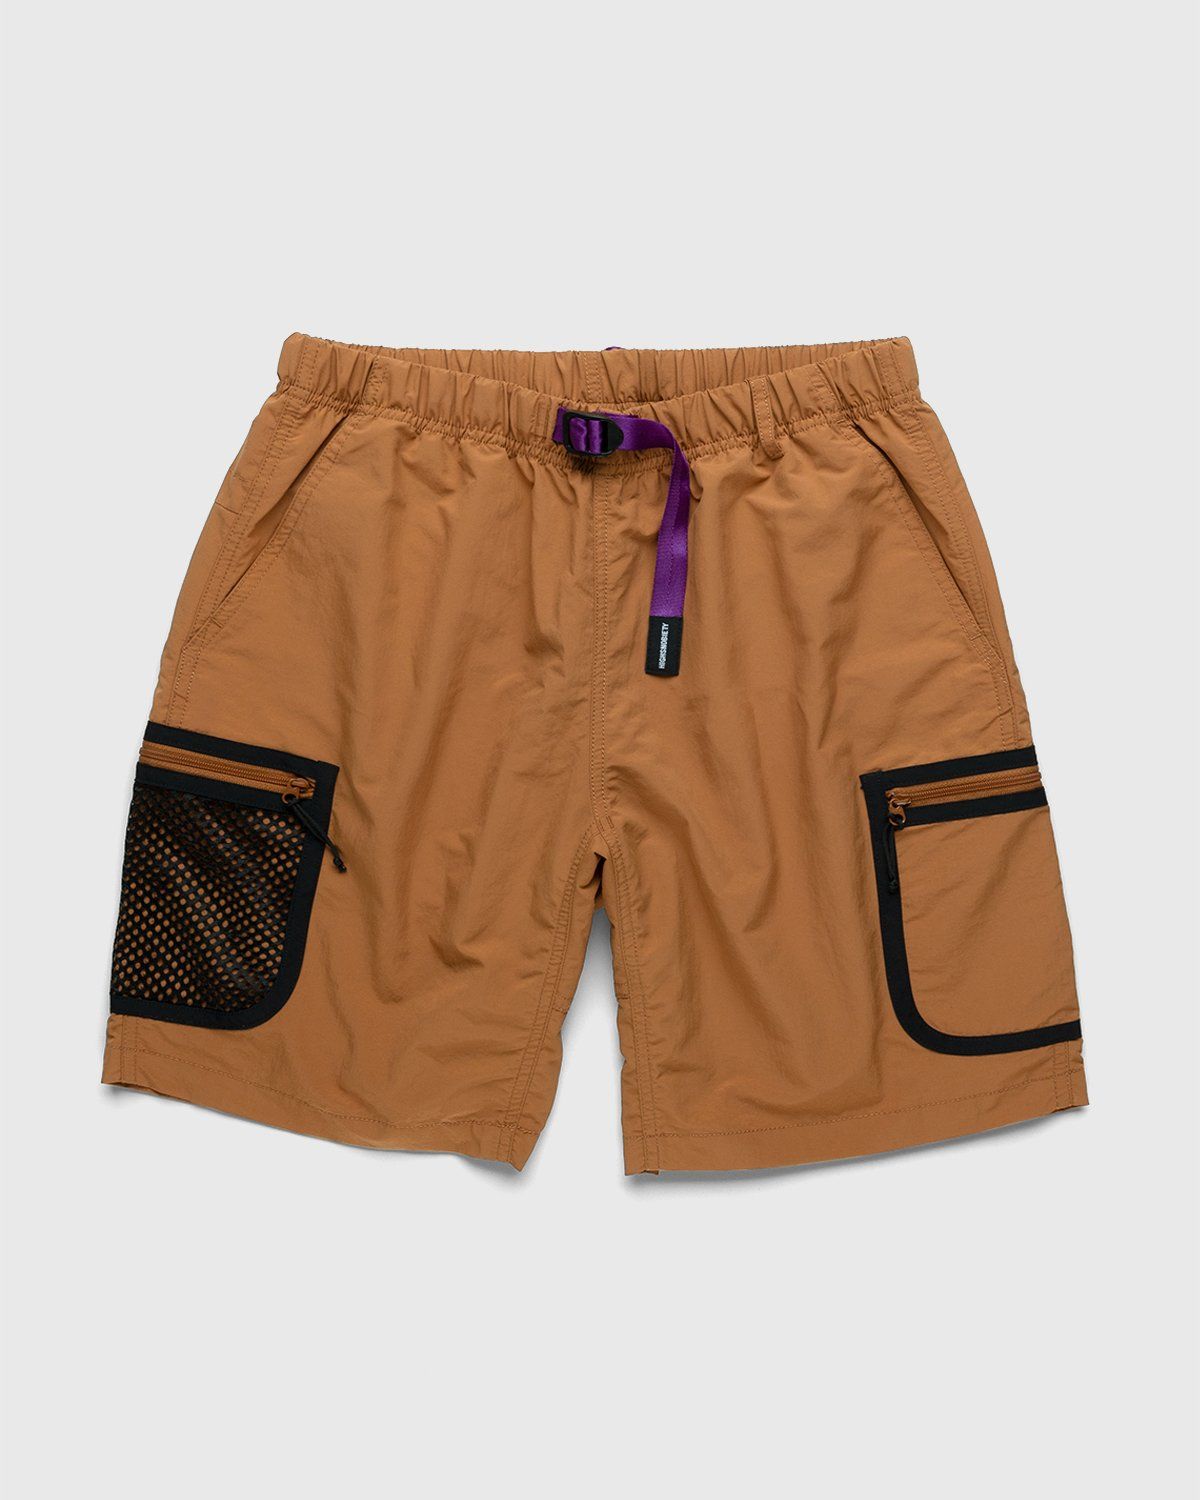 Gramicci x Highsnobiety – Shorts Rust - Active Shorts - Brown - Image 1